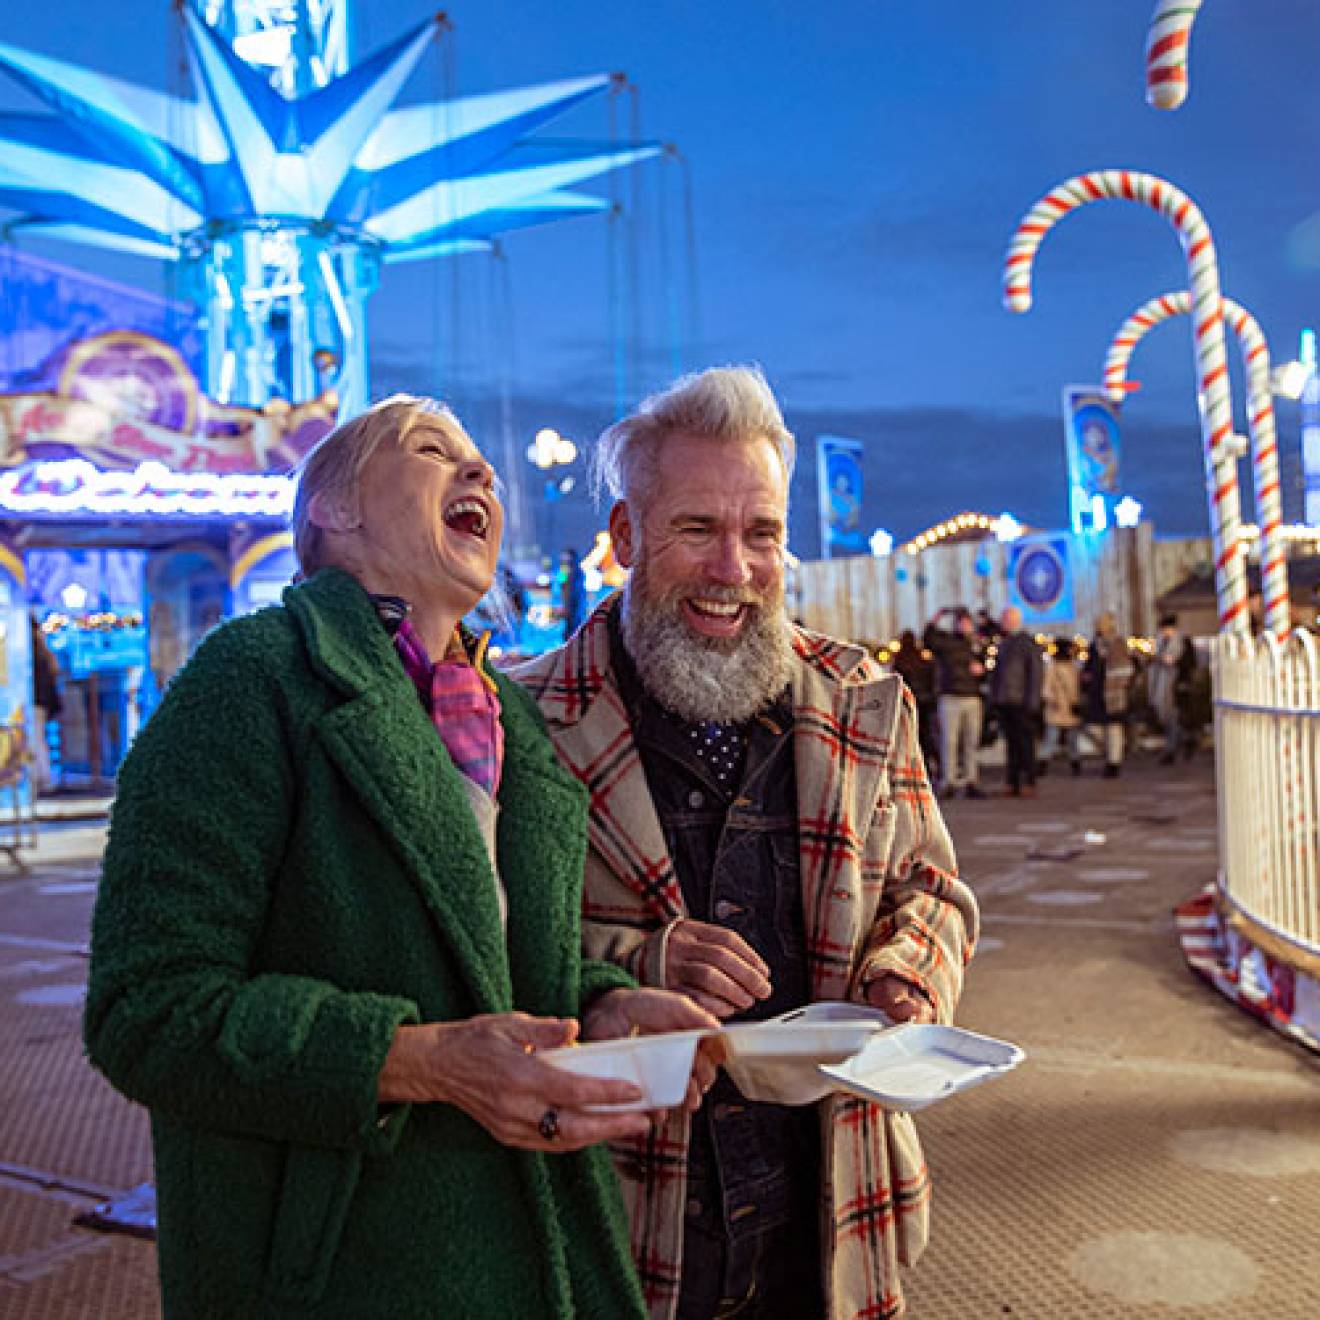 An older couple laughing at a carnival